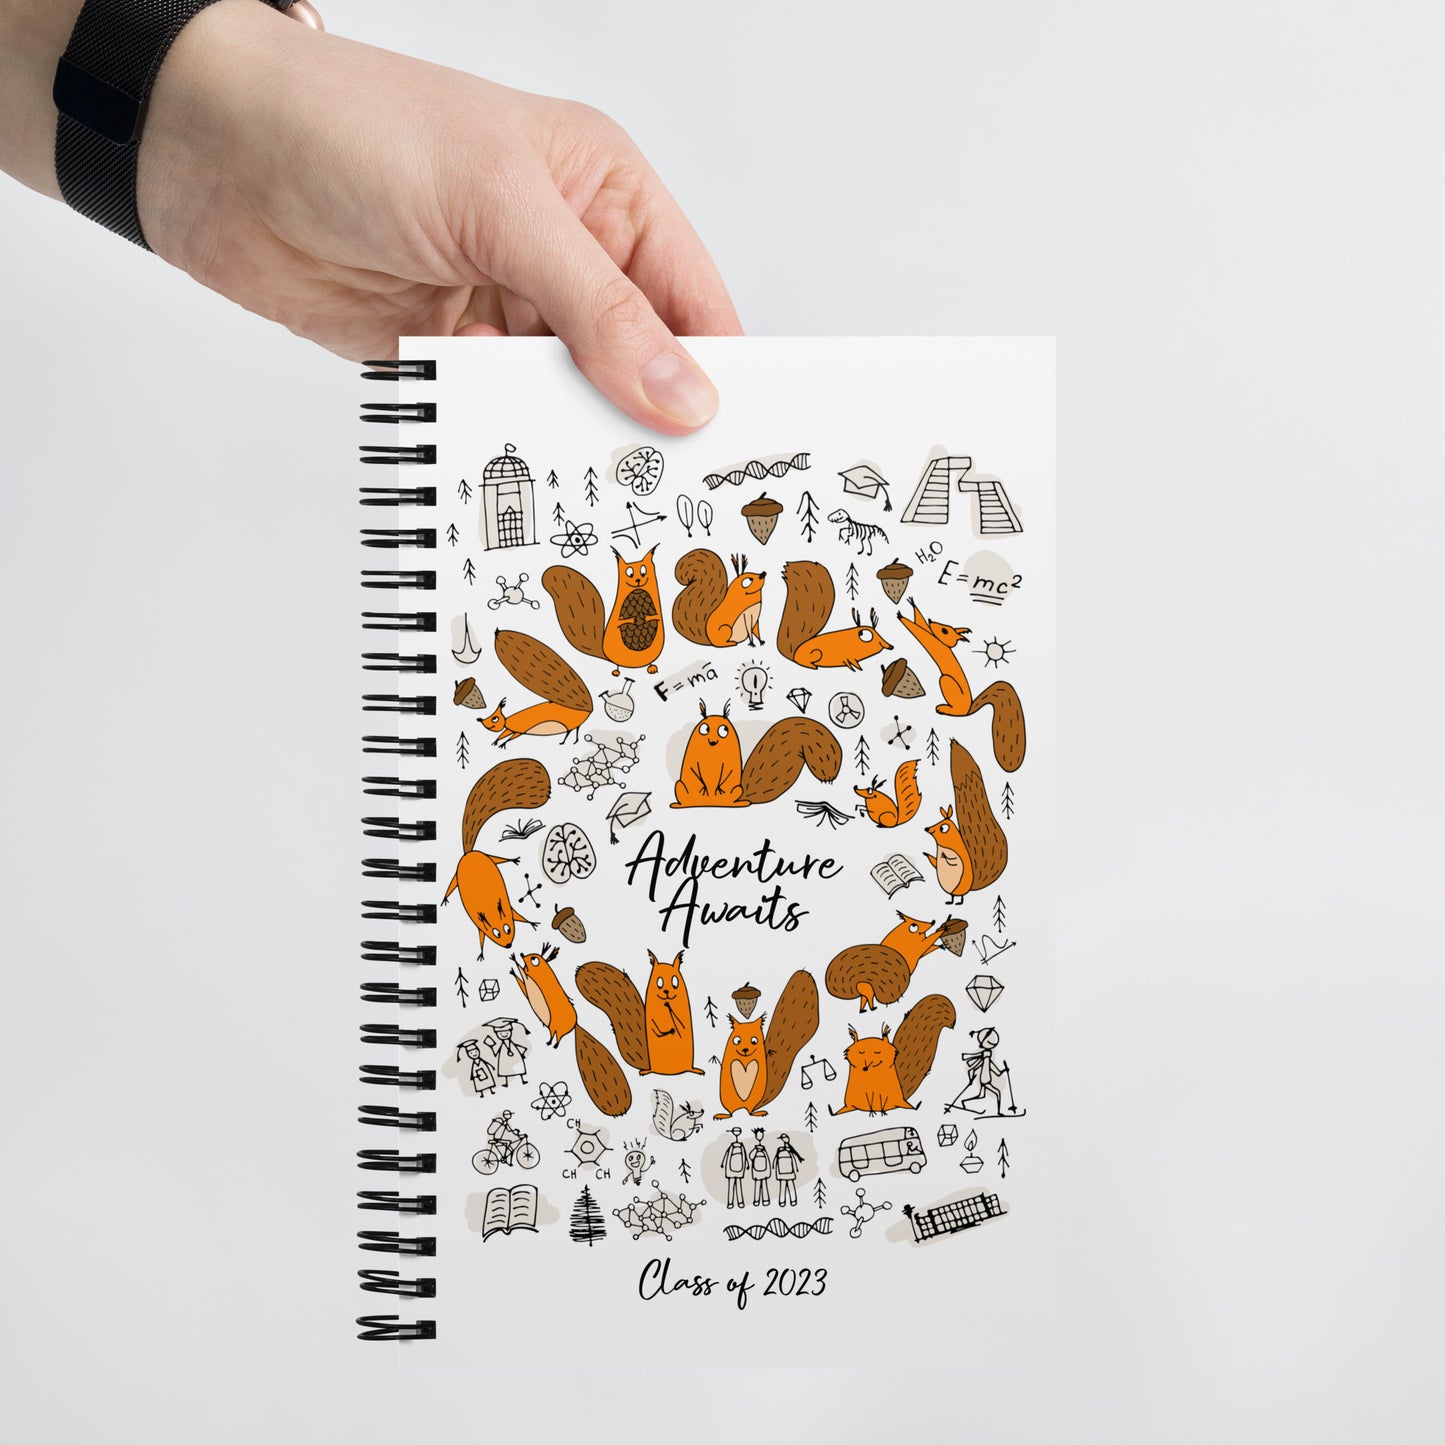 Spiral notebook white with funny science squirrels designer print